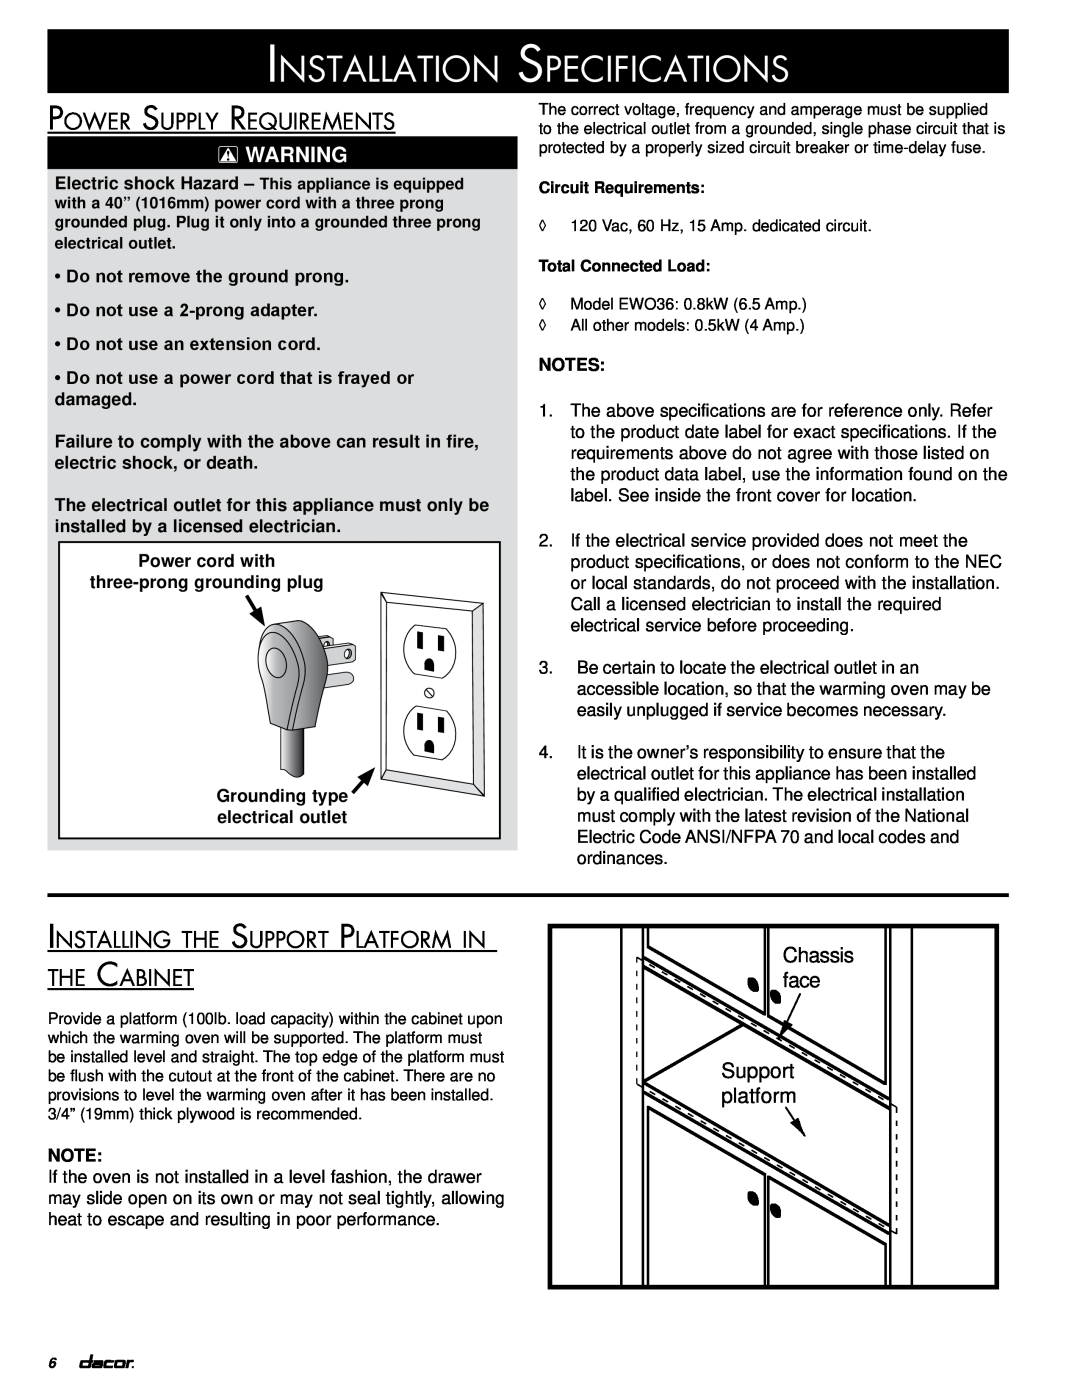 Dacor PWO, IOWO Power Supply Requirements, Installing the Support Platform in the Cabinet, Do not use an extension cord 